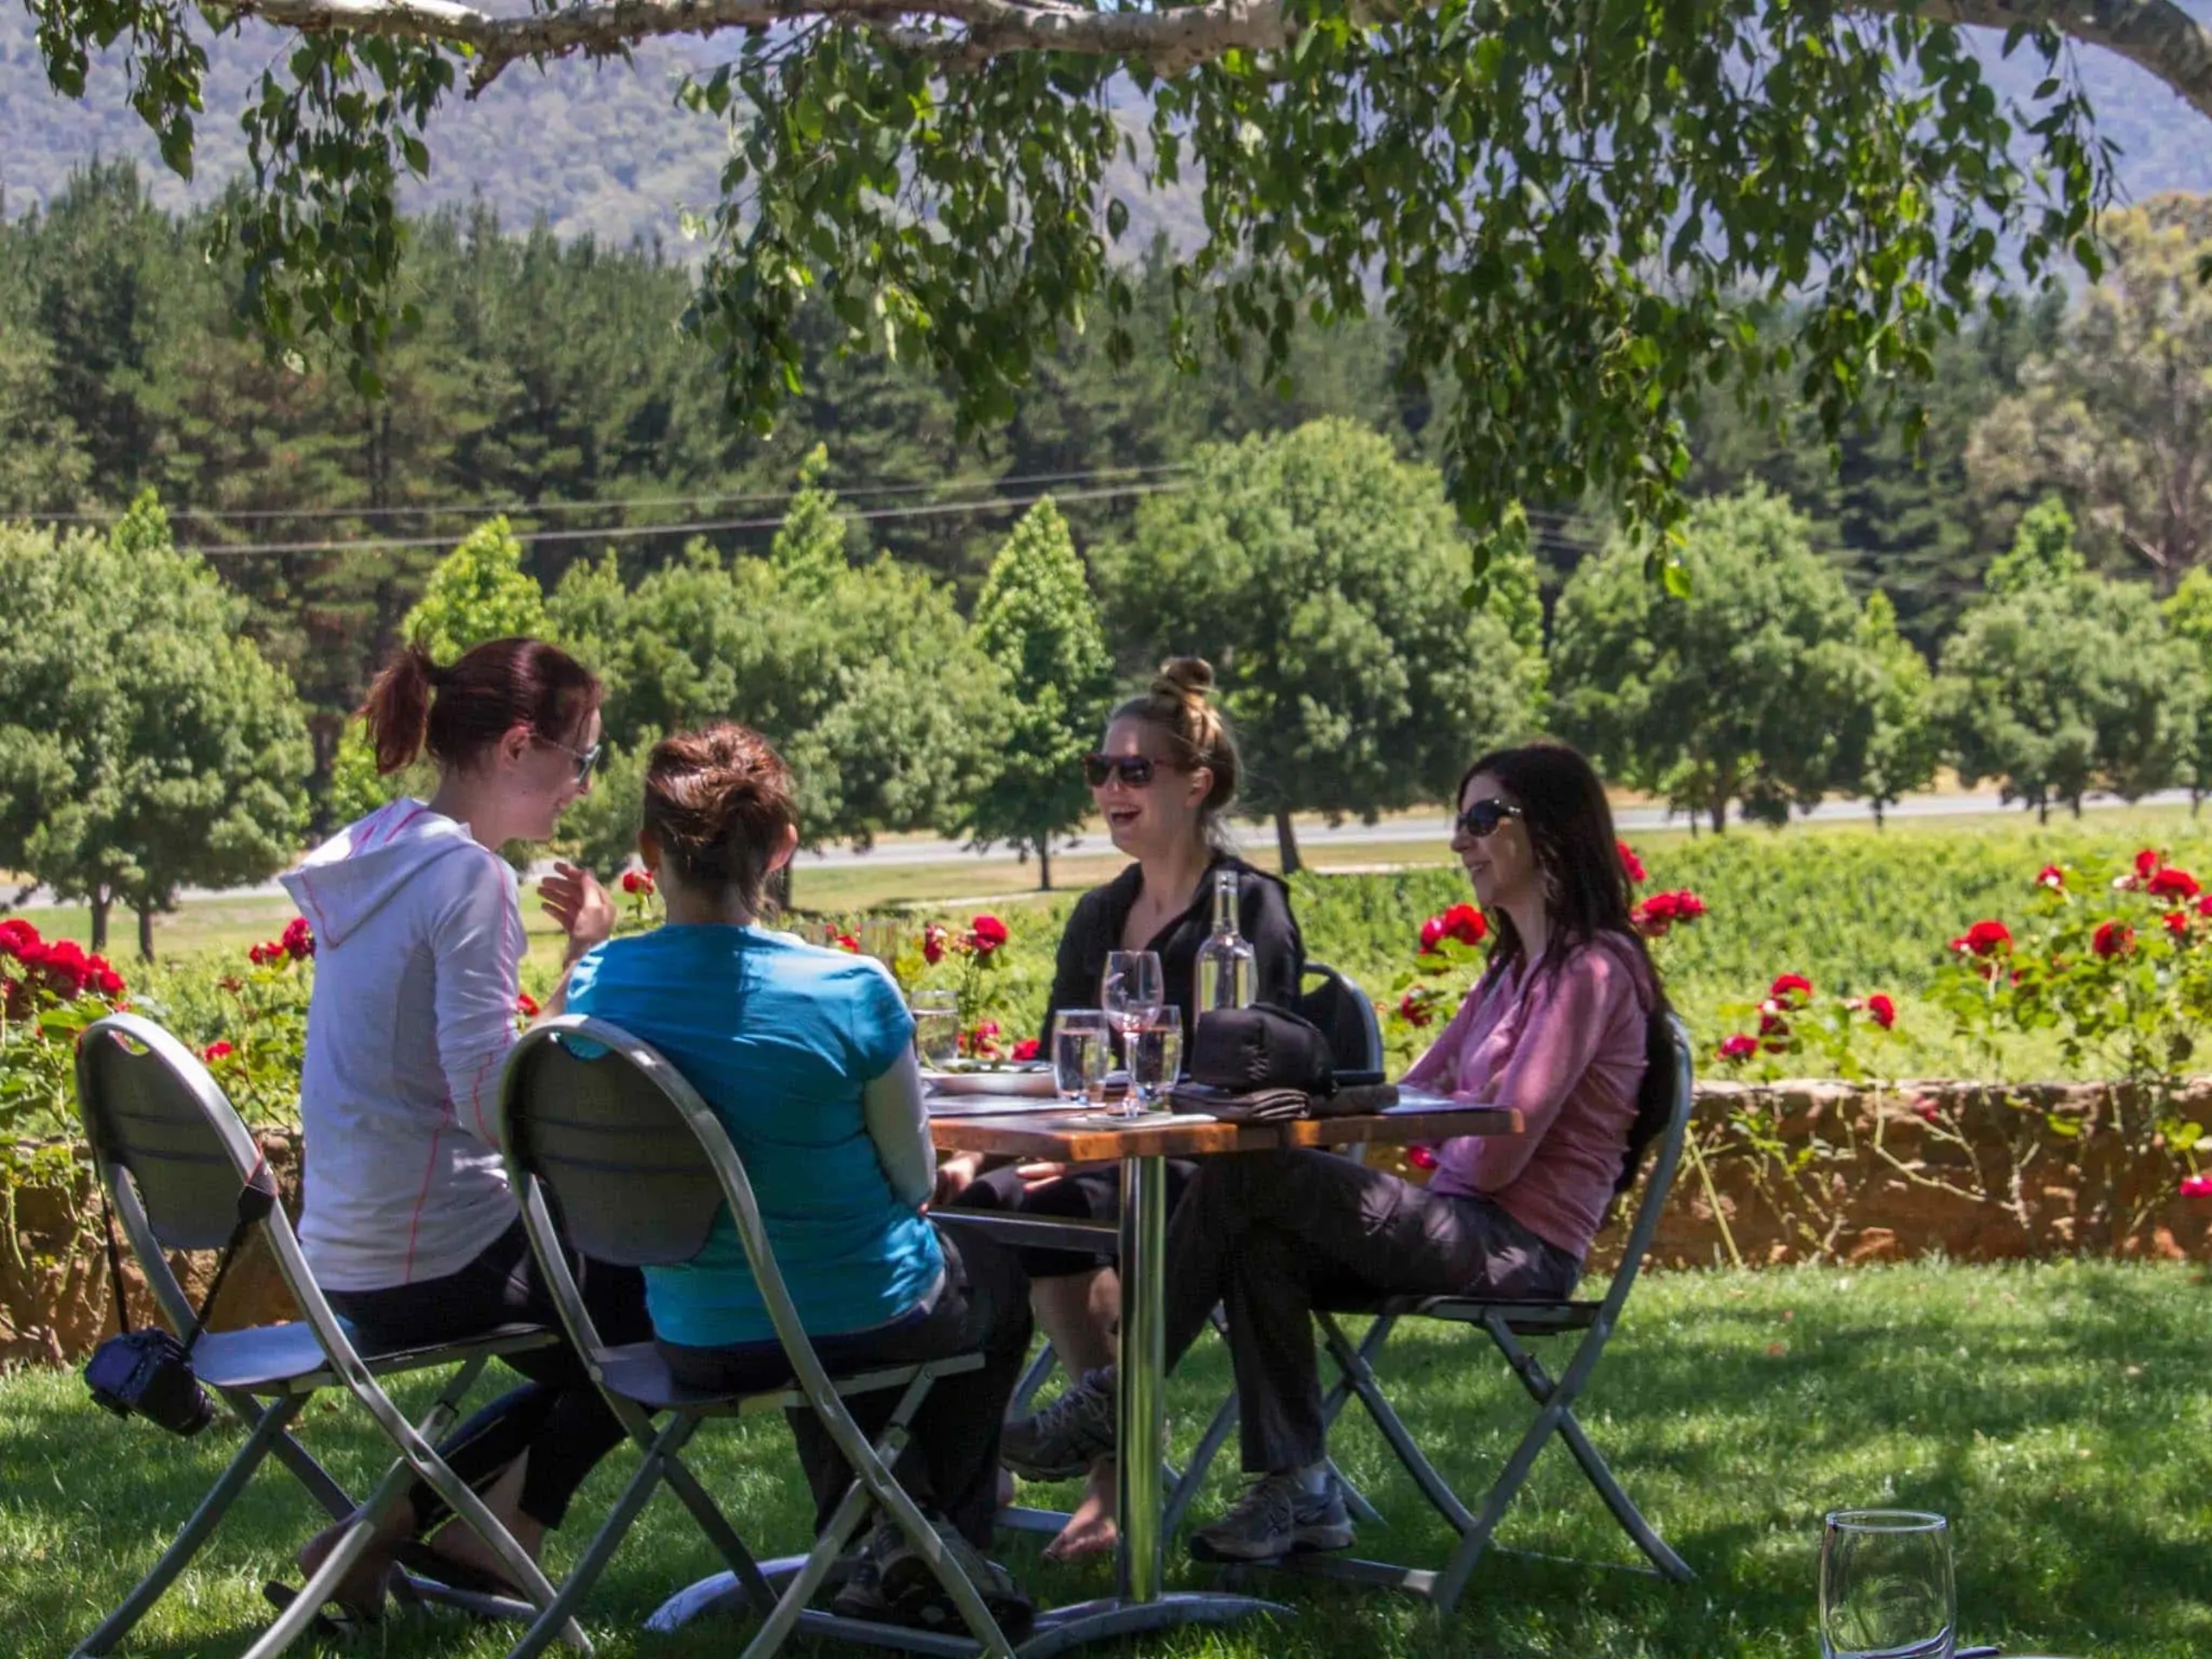 Group of ladies enjoying a lunch break with wine in Australia